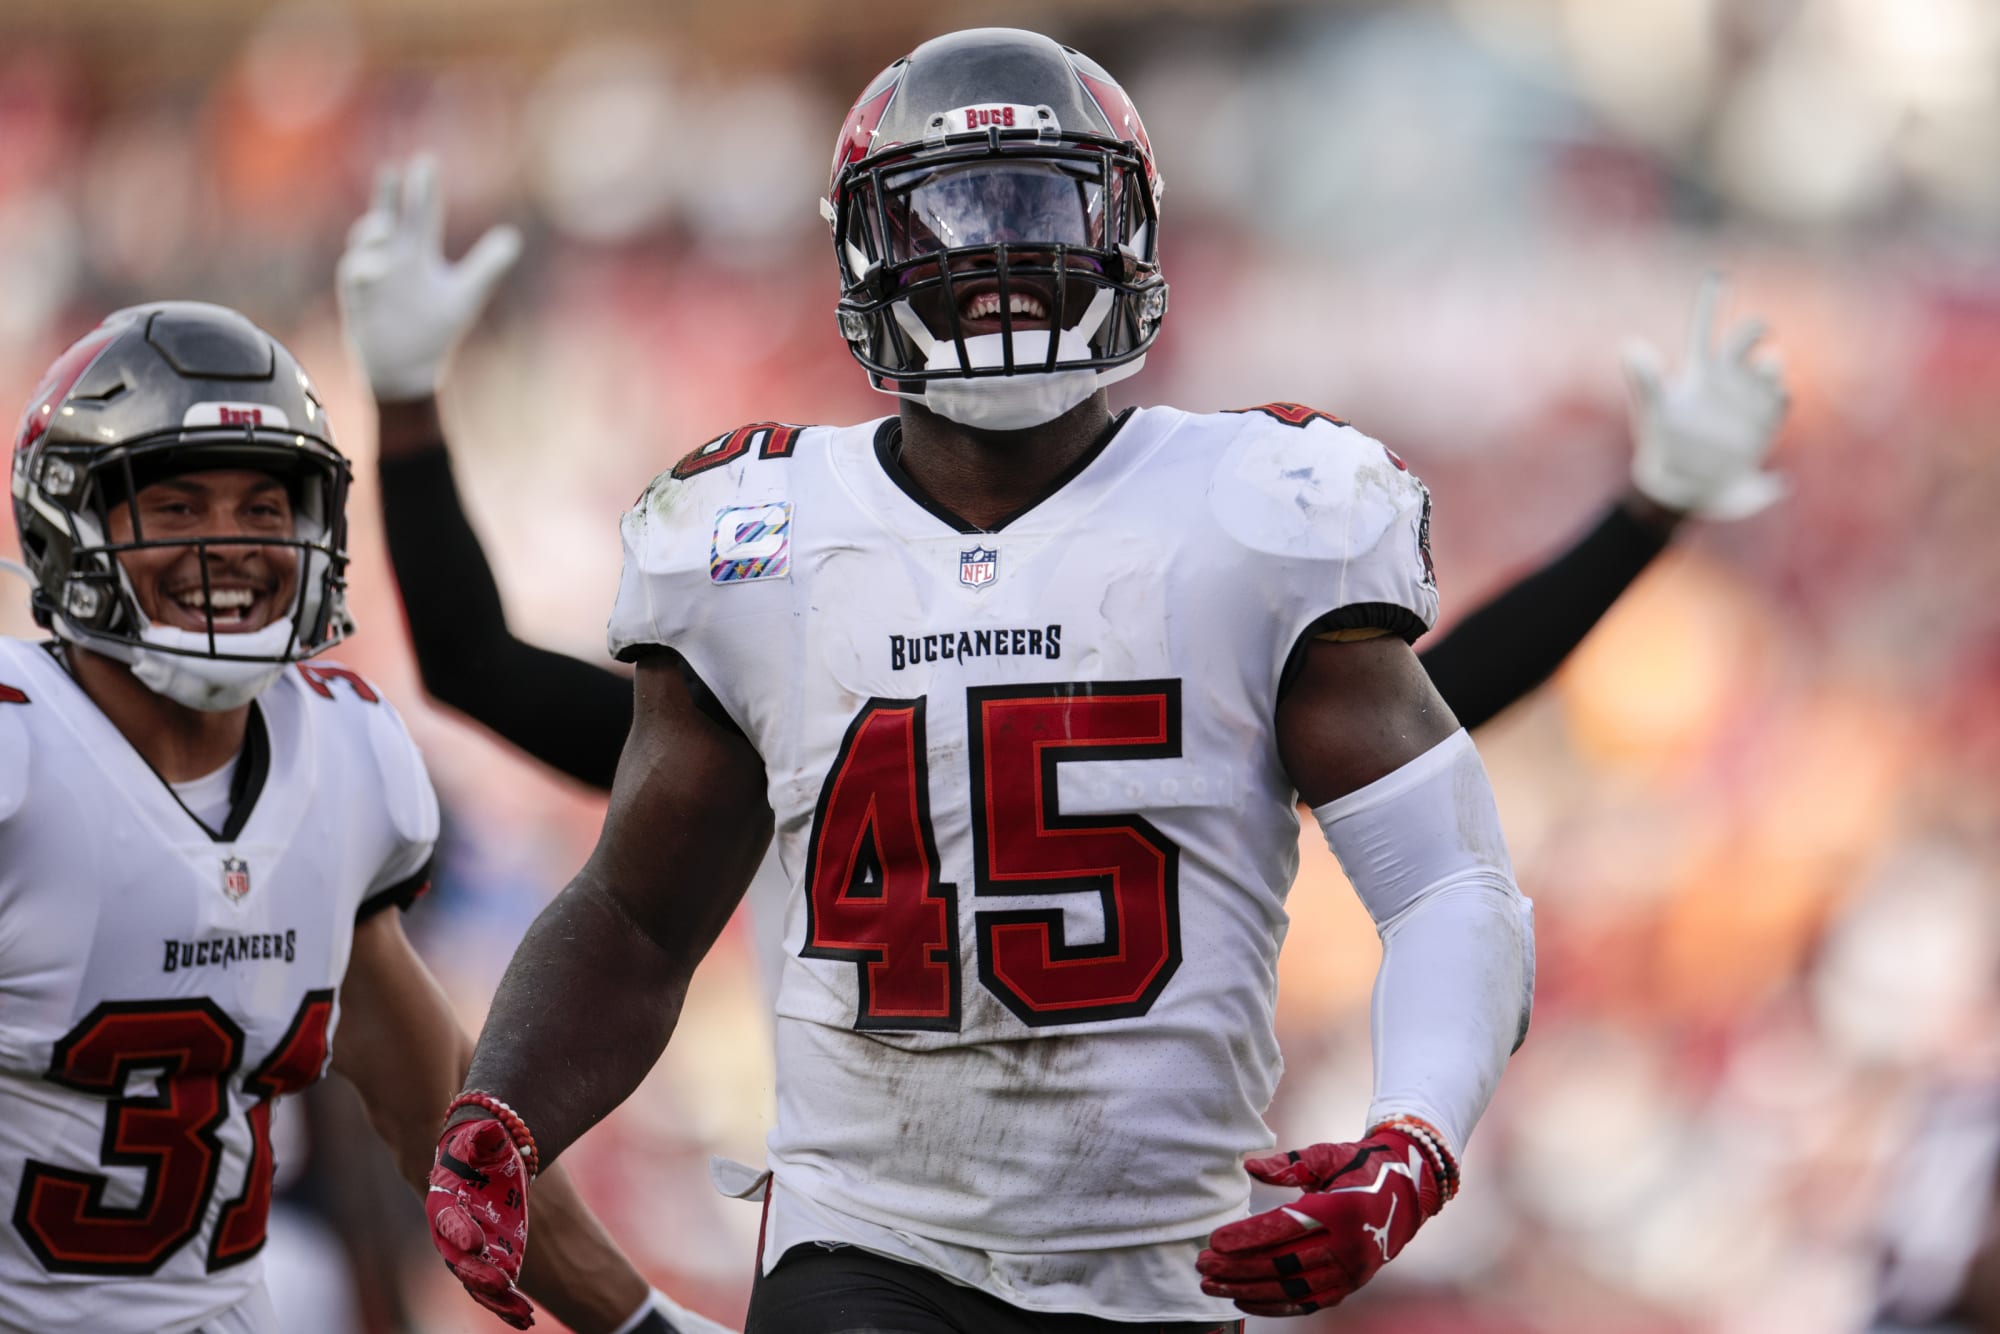 Buccaneers Pro Bowl linebacker requests a trade